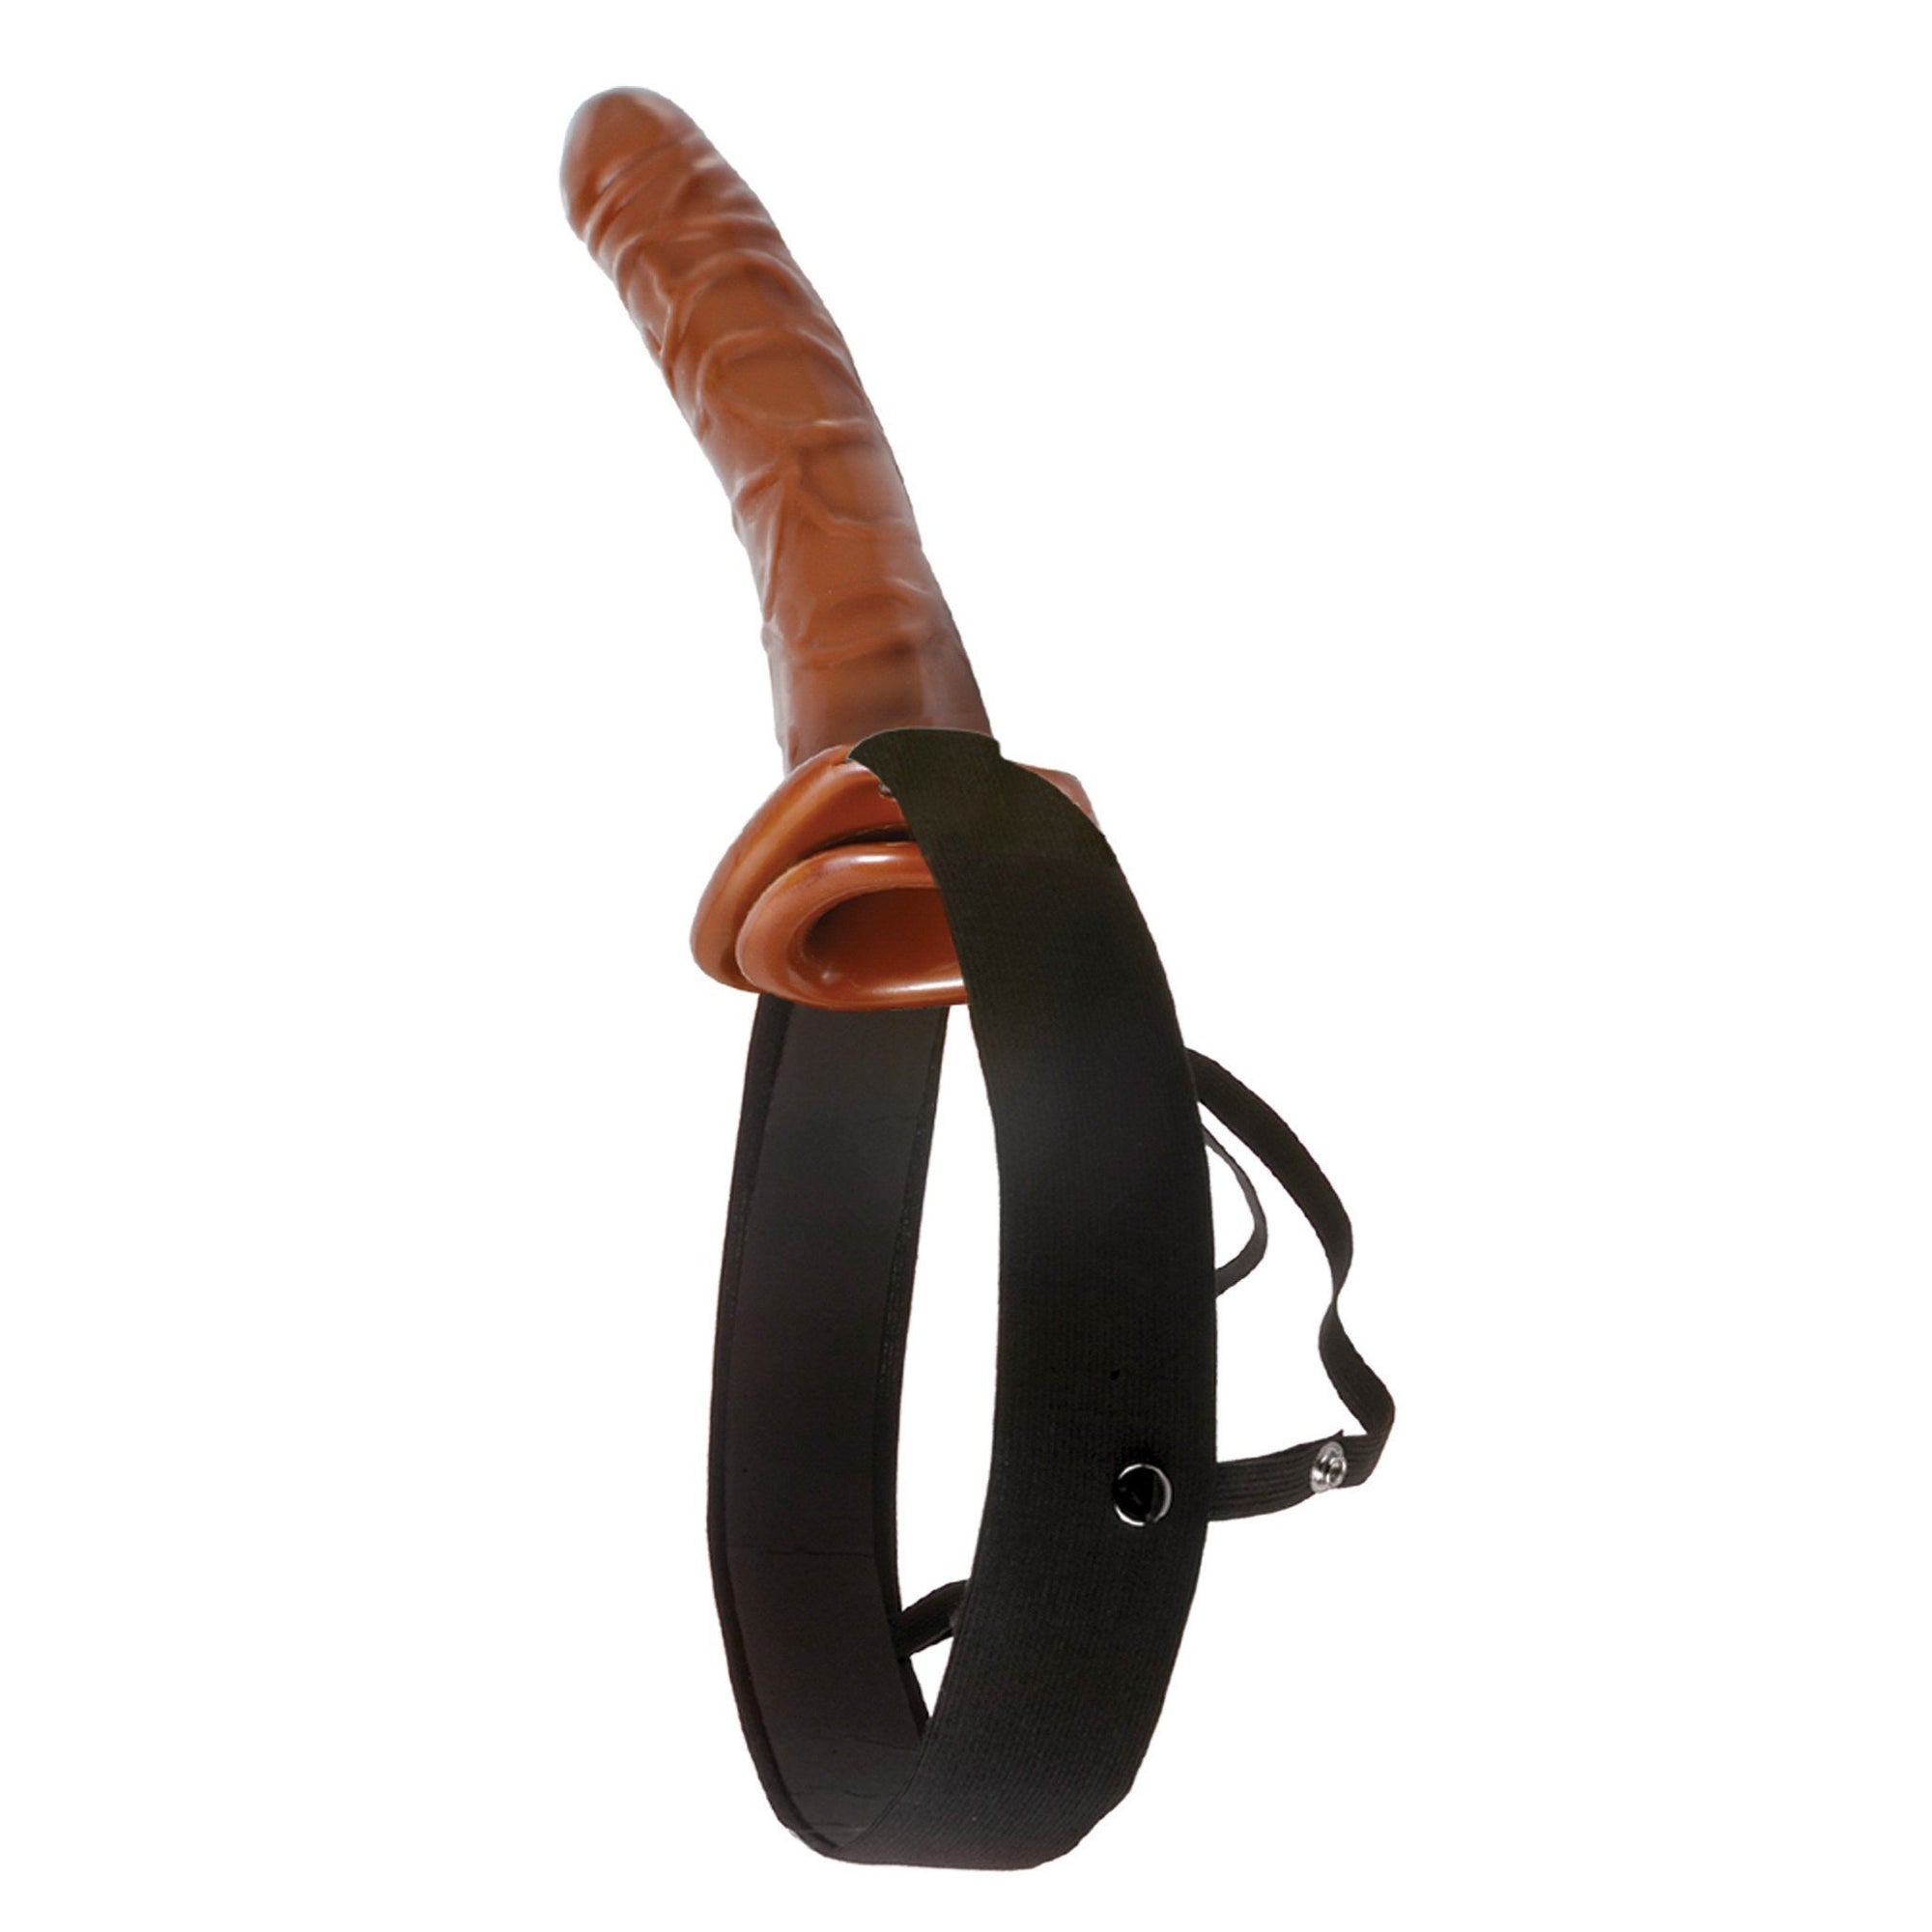 Pipedream - Fetish Fantasy Series 10" Chocolate Dream Hollow Strap-On (Brown) Strap On with Hollow Dildo for Male (Non Vibration) - CherryAffairs Singapore